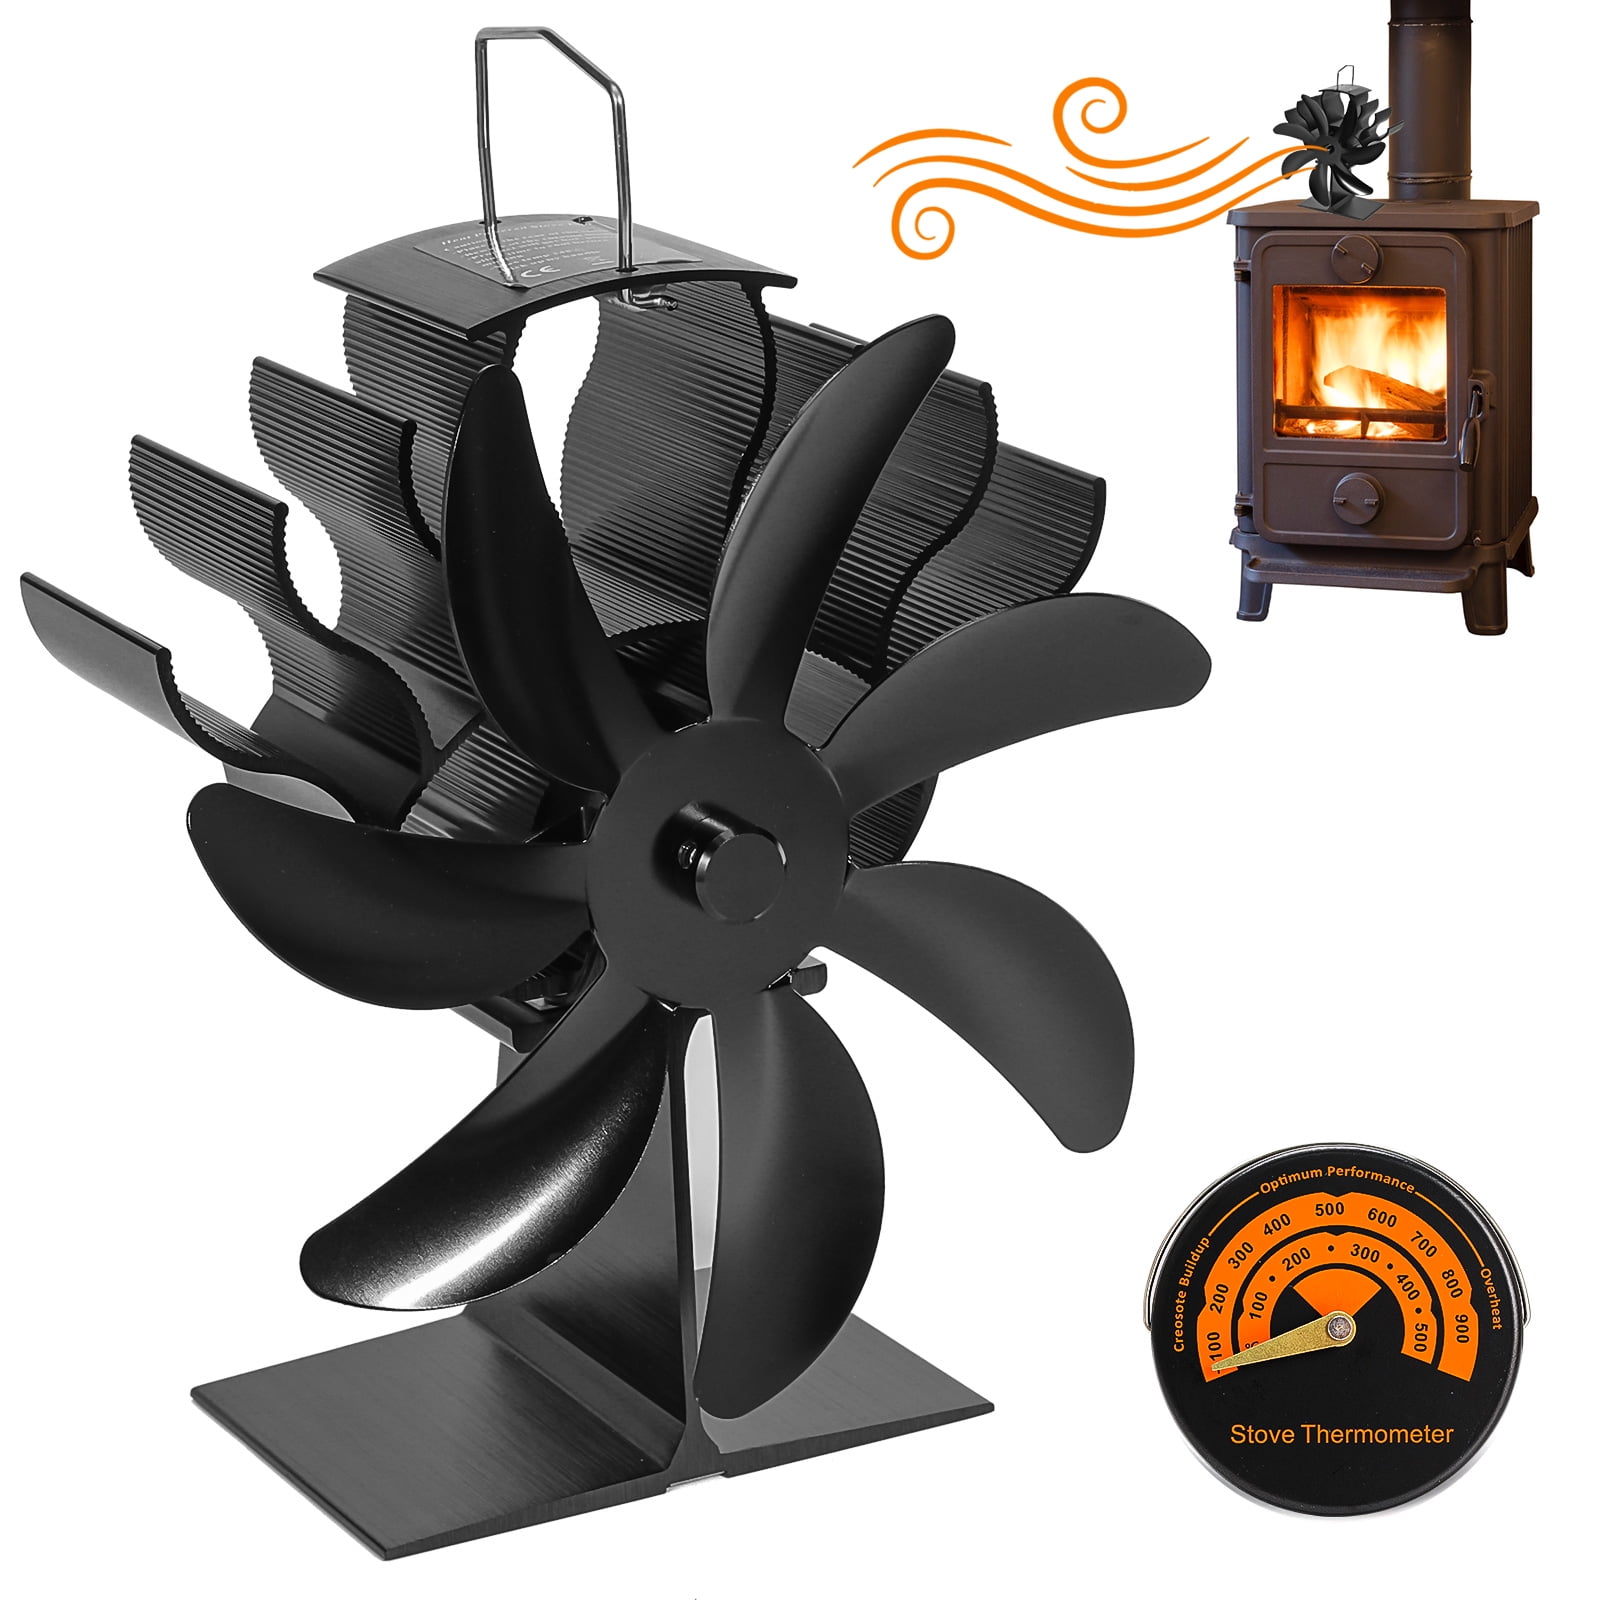 Wood Stove Fan Heat Powered, 7 Blade Fireplace Fan Non-Electric, Thermoelectric Fan Eco Fan for Wood Burning Stove/Pellet/Log with Accessories Magnetic Thermometer - Walmart.com